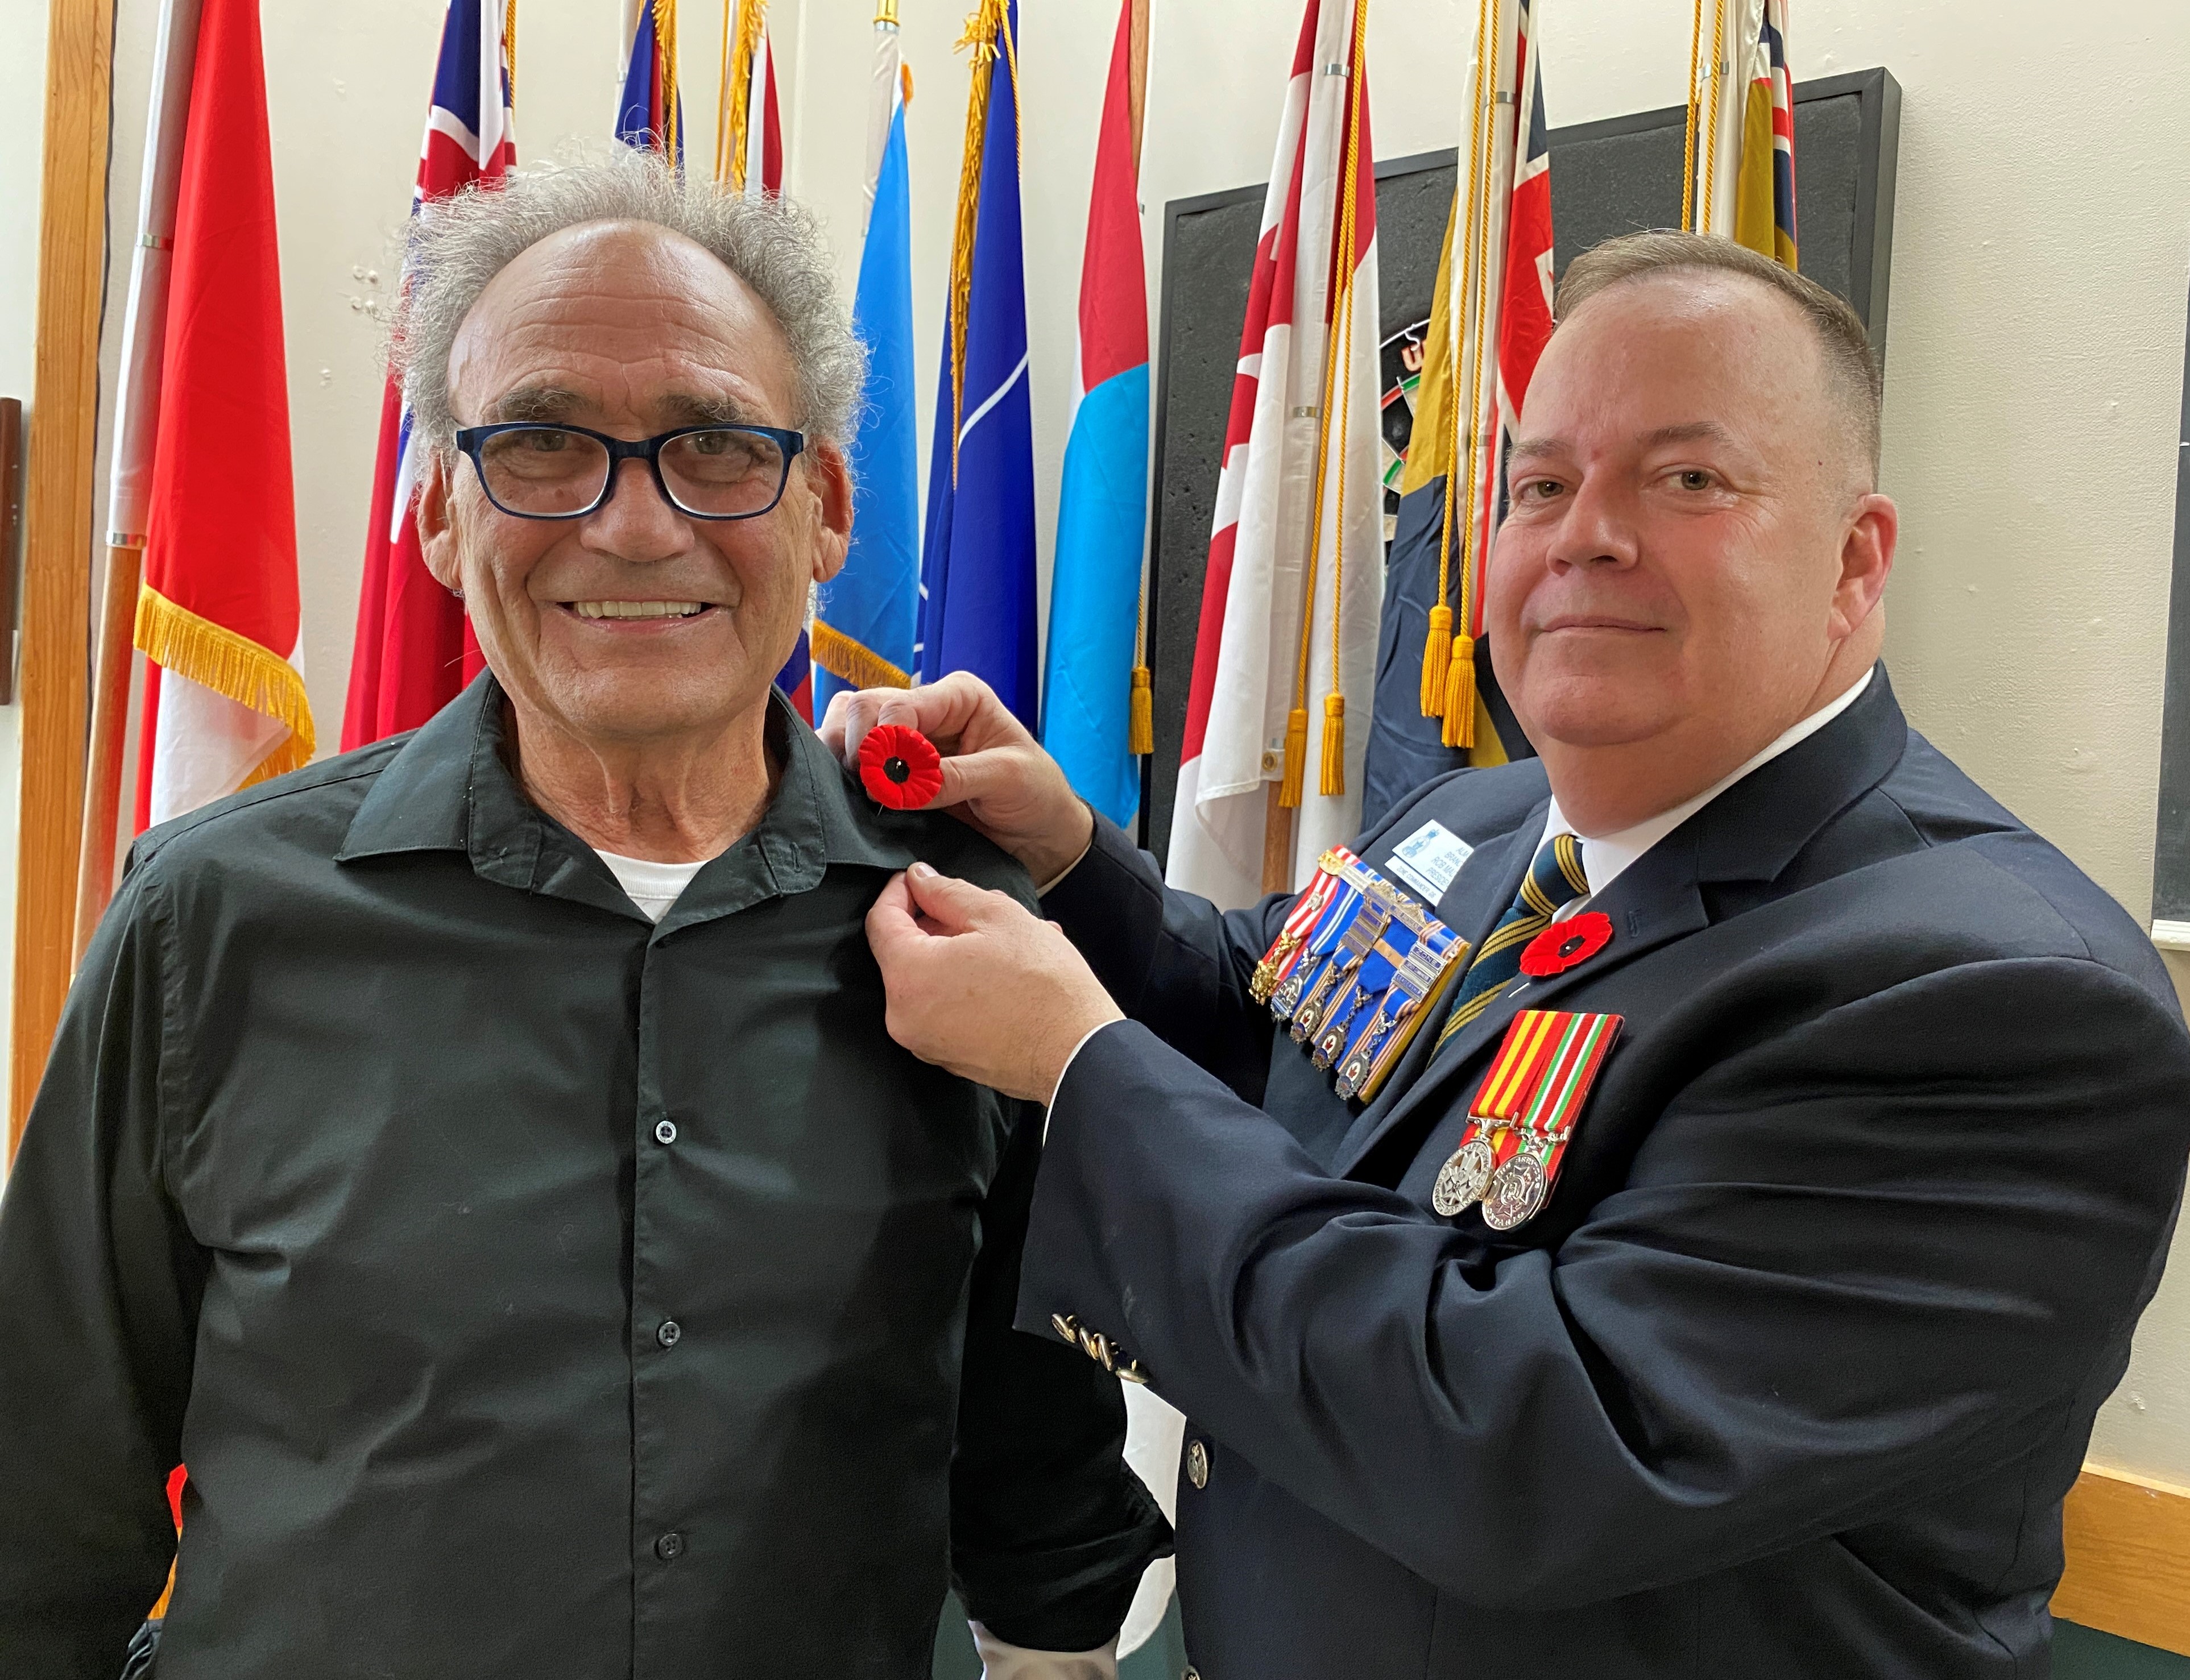 Two men standing in front of flags with one man pinning poppy to lapel